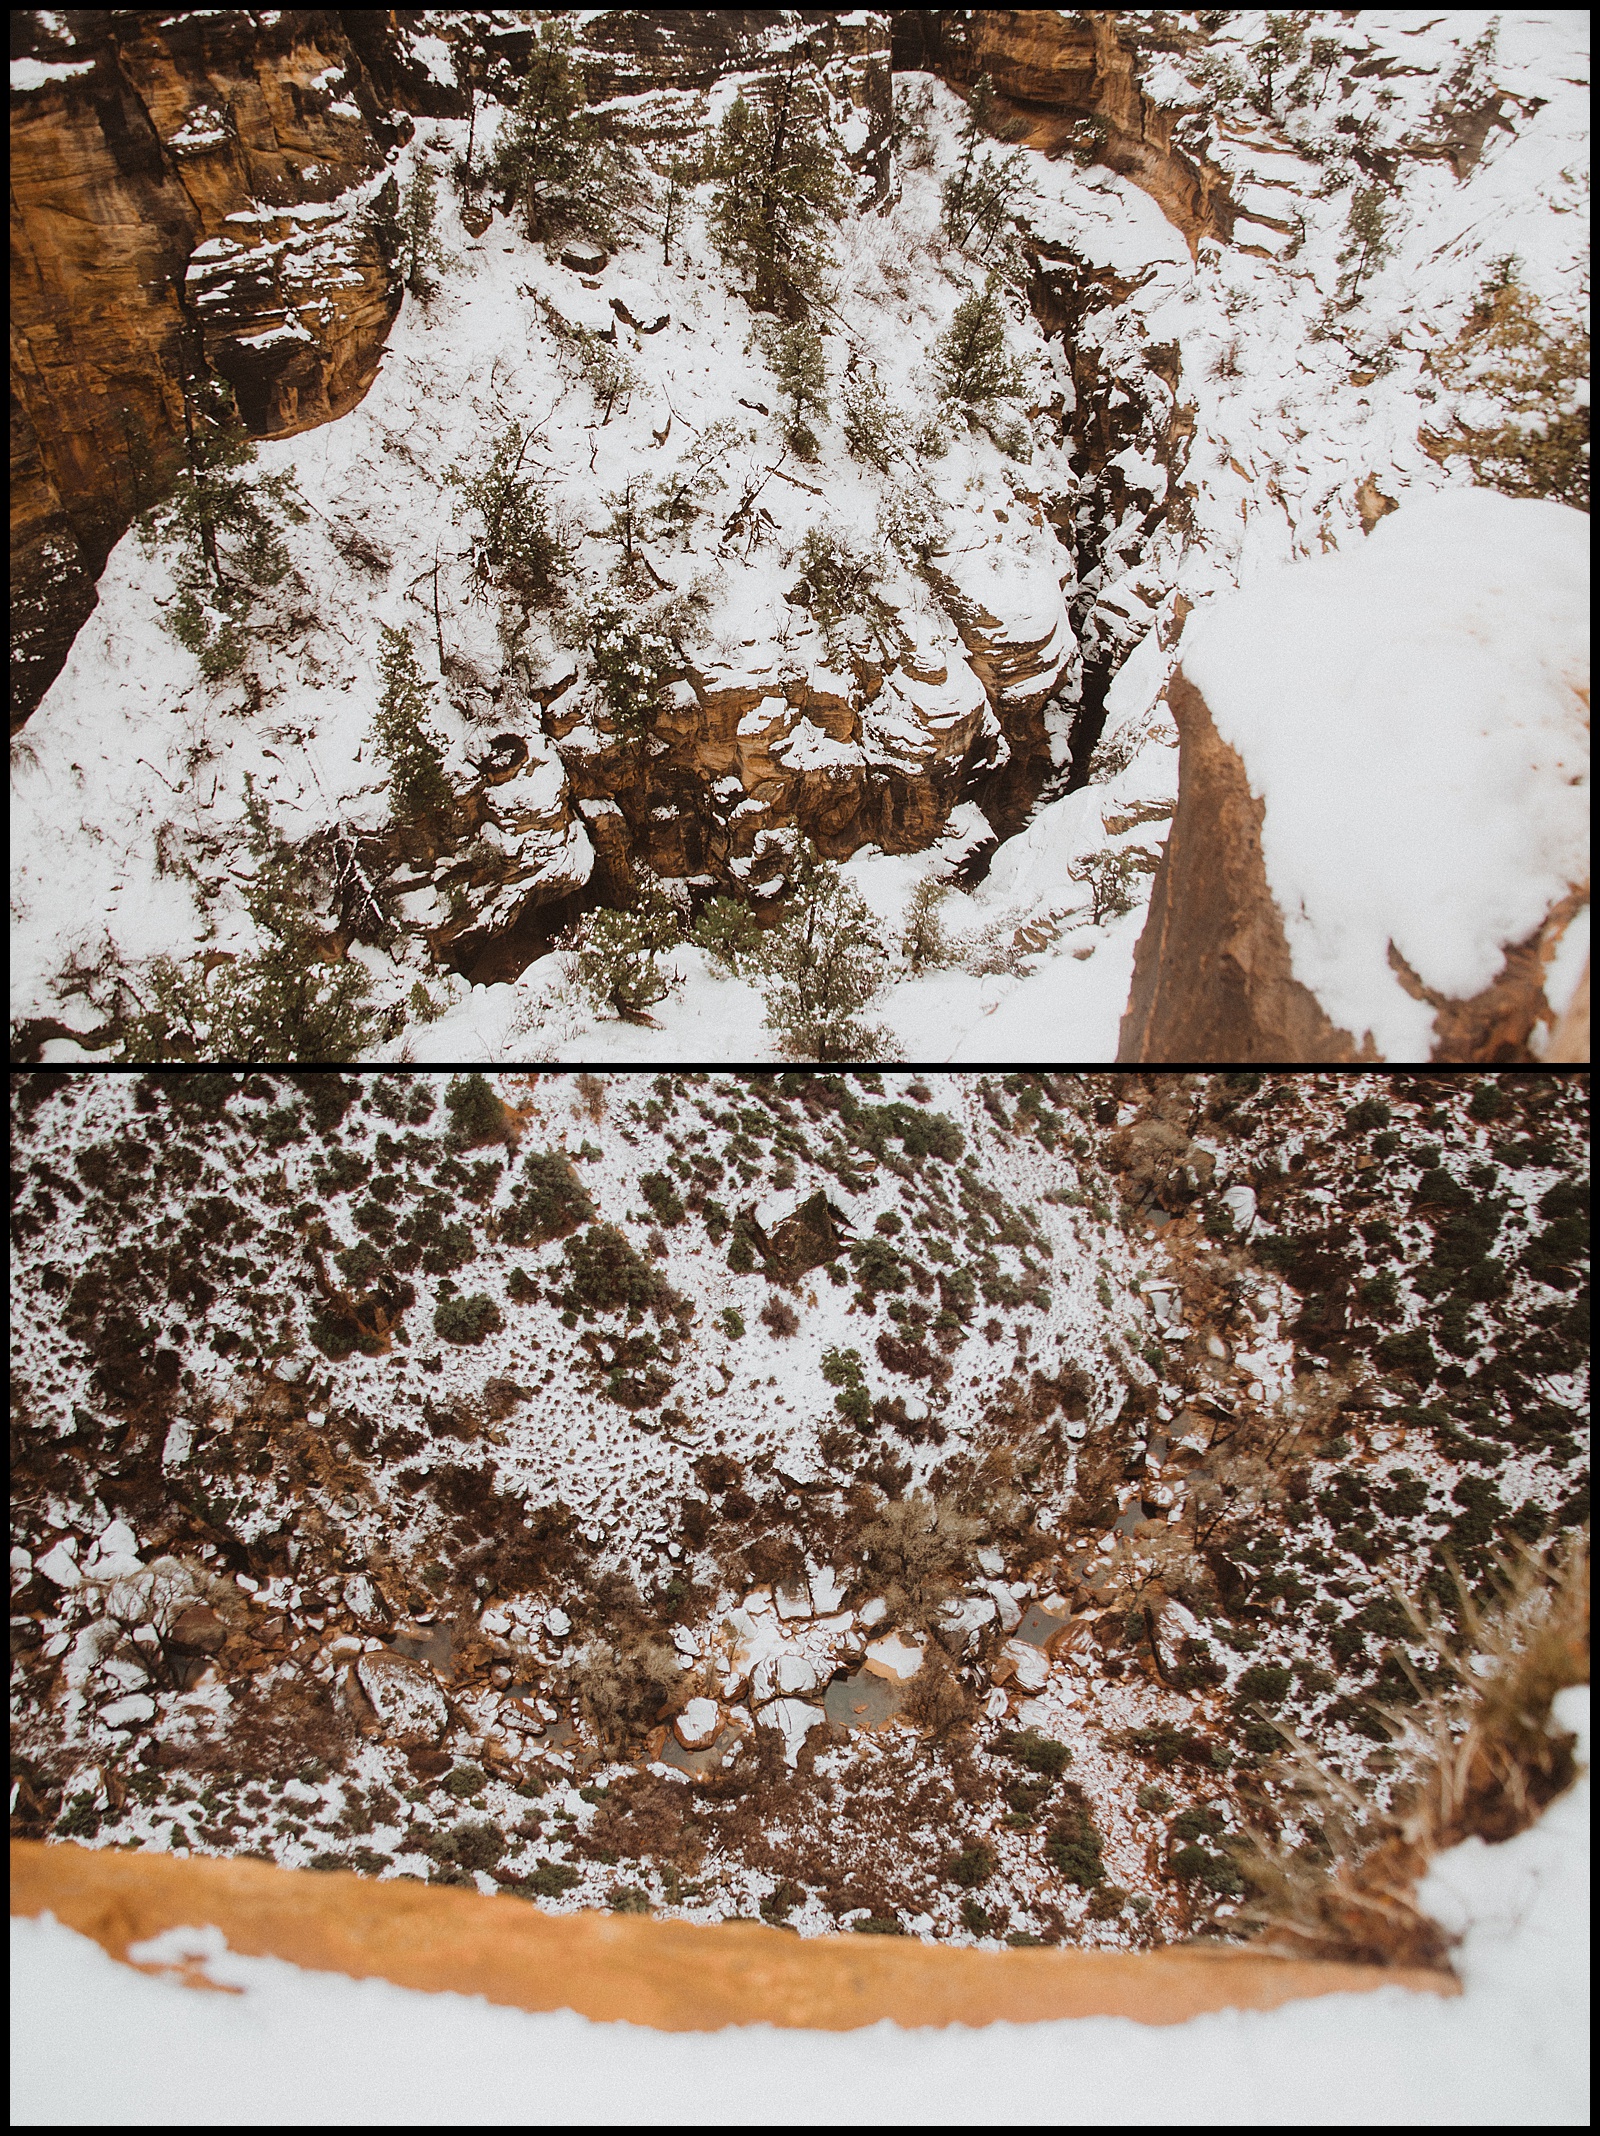 zion national park, winter in zion, how to propose, zion guide, zion narrows, zion elopement, 